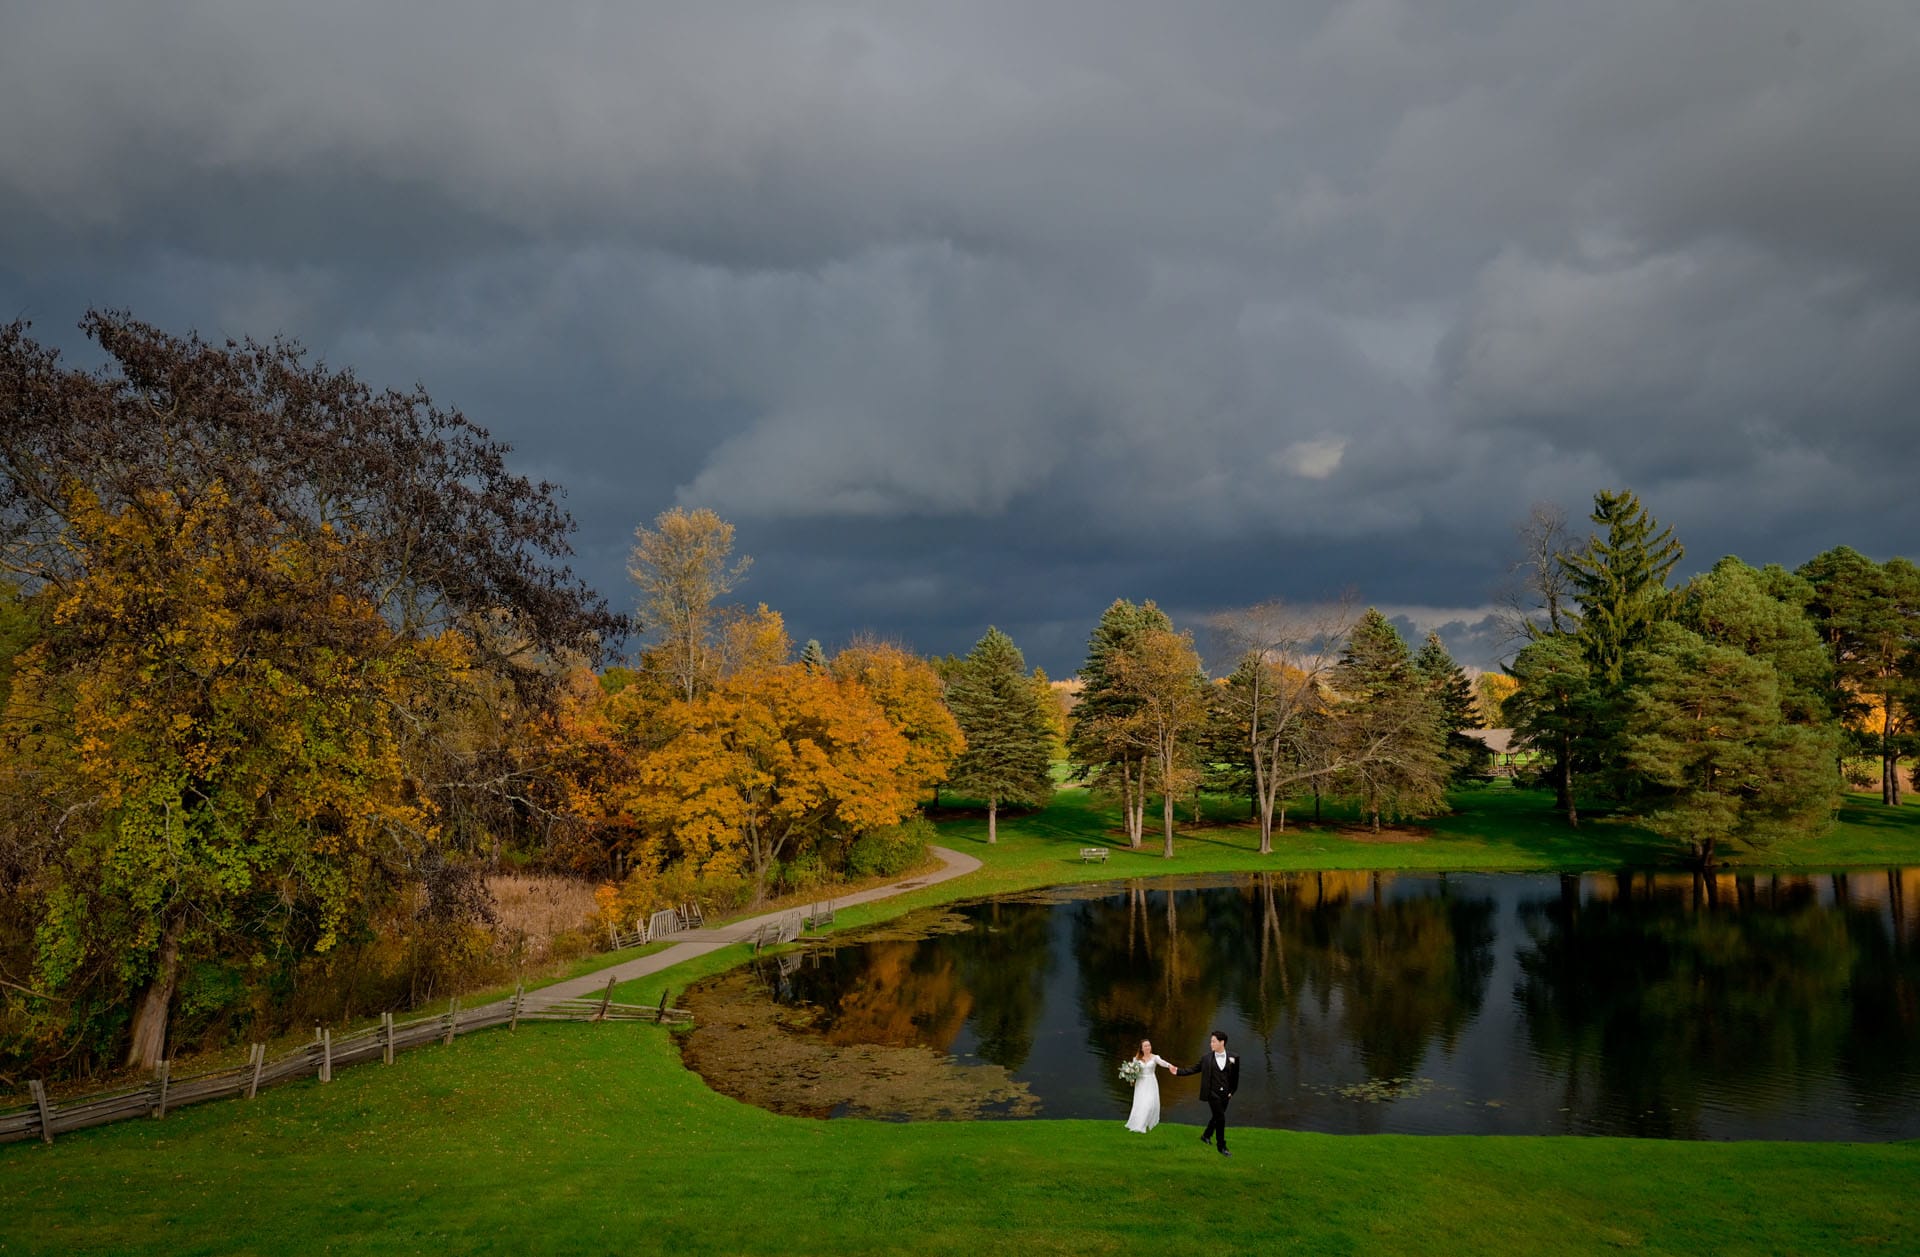 Bride and groom head away from the pond before a storm hits at Addison Oaks Buhl Estate in Leonard, Michigan.